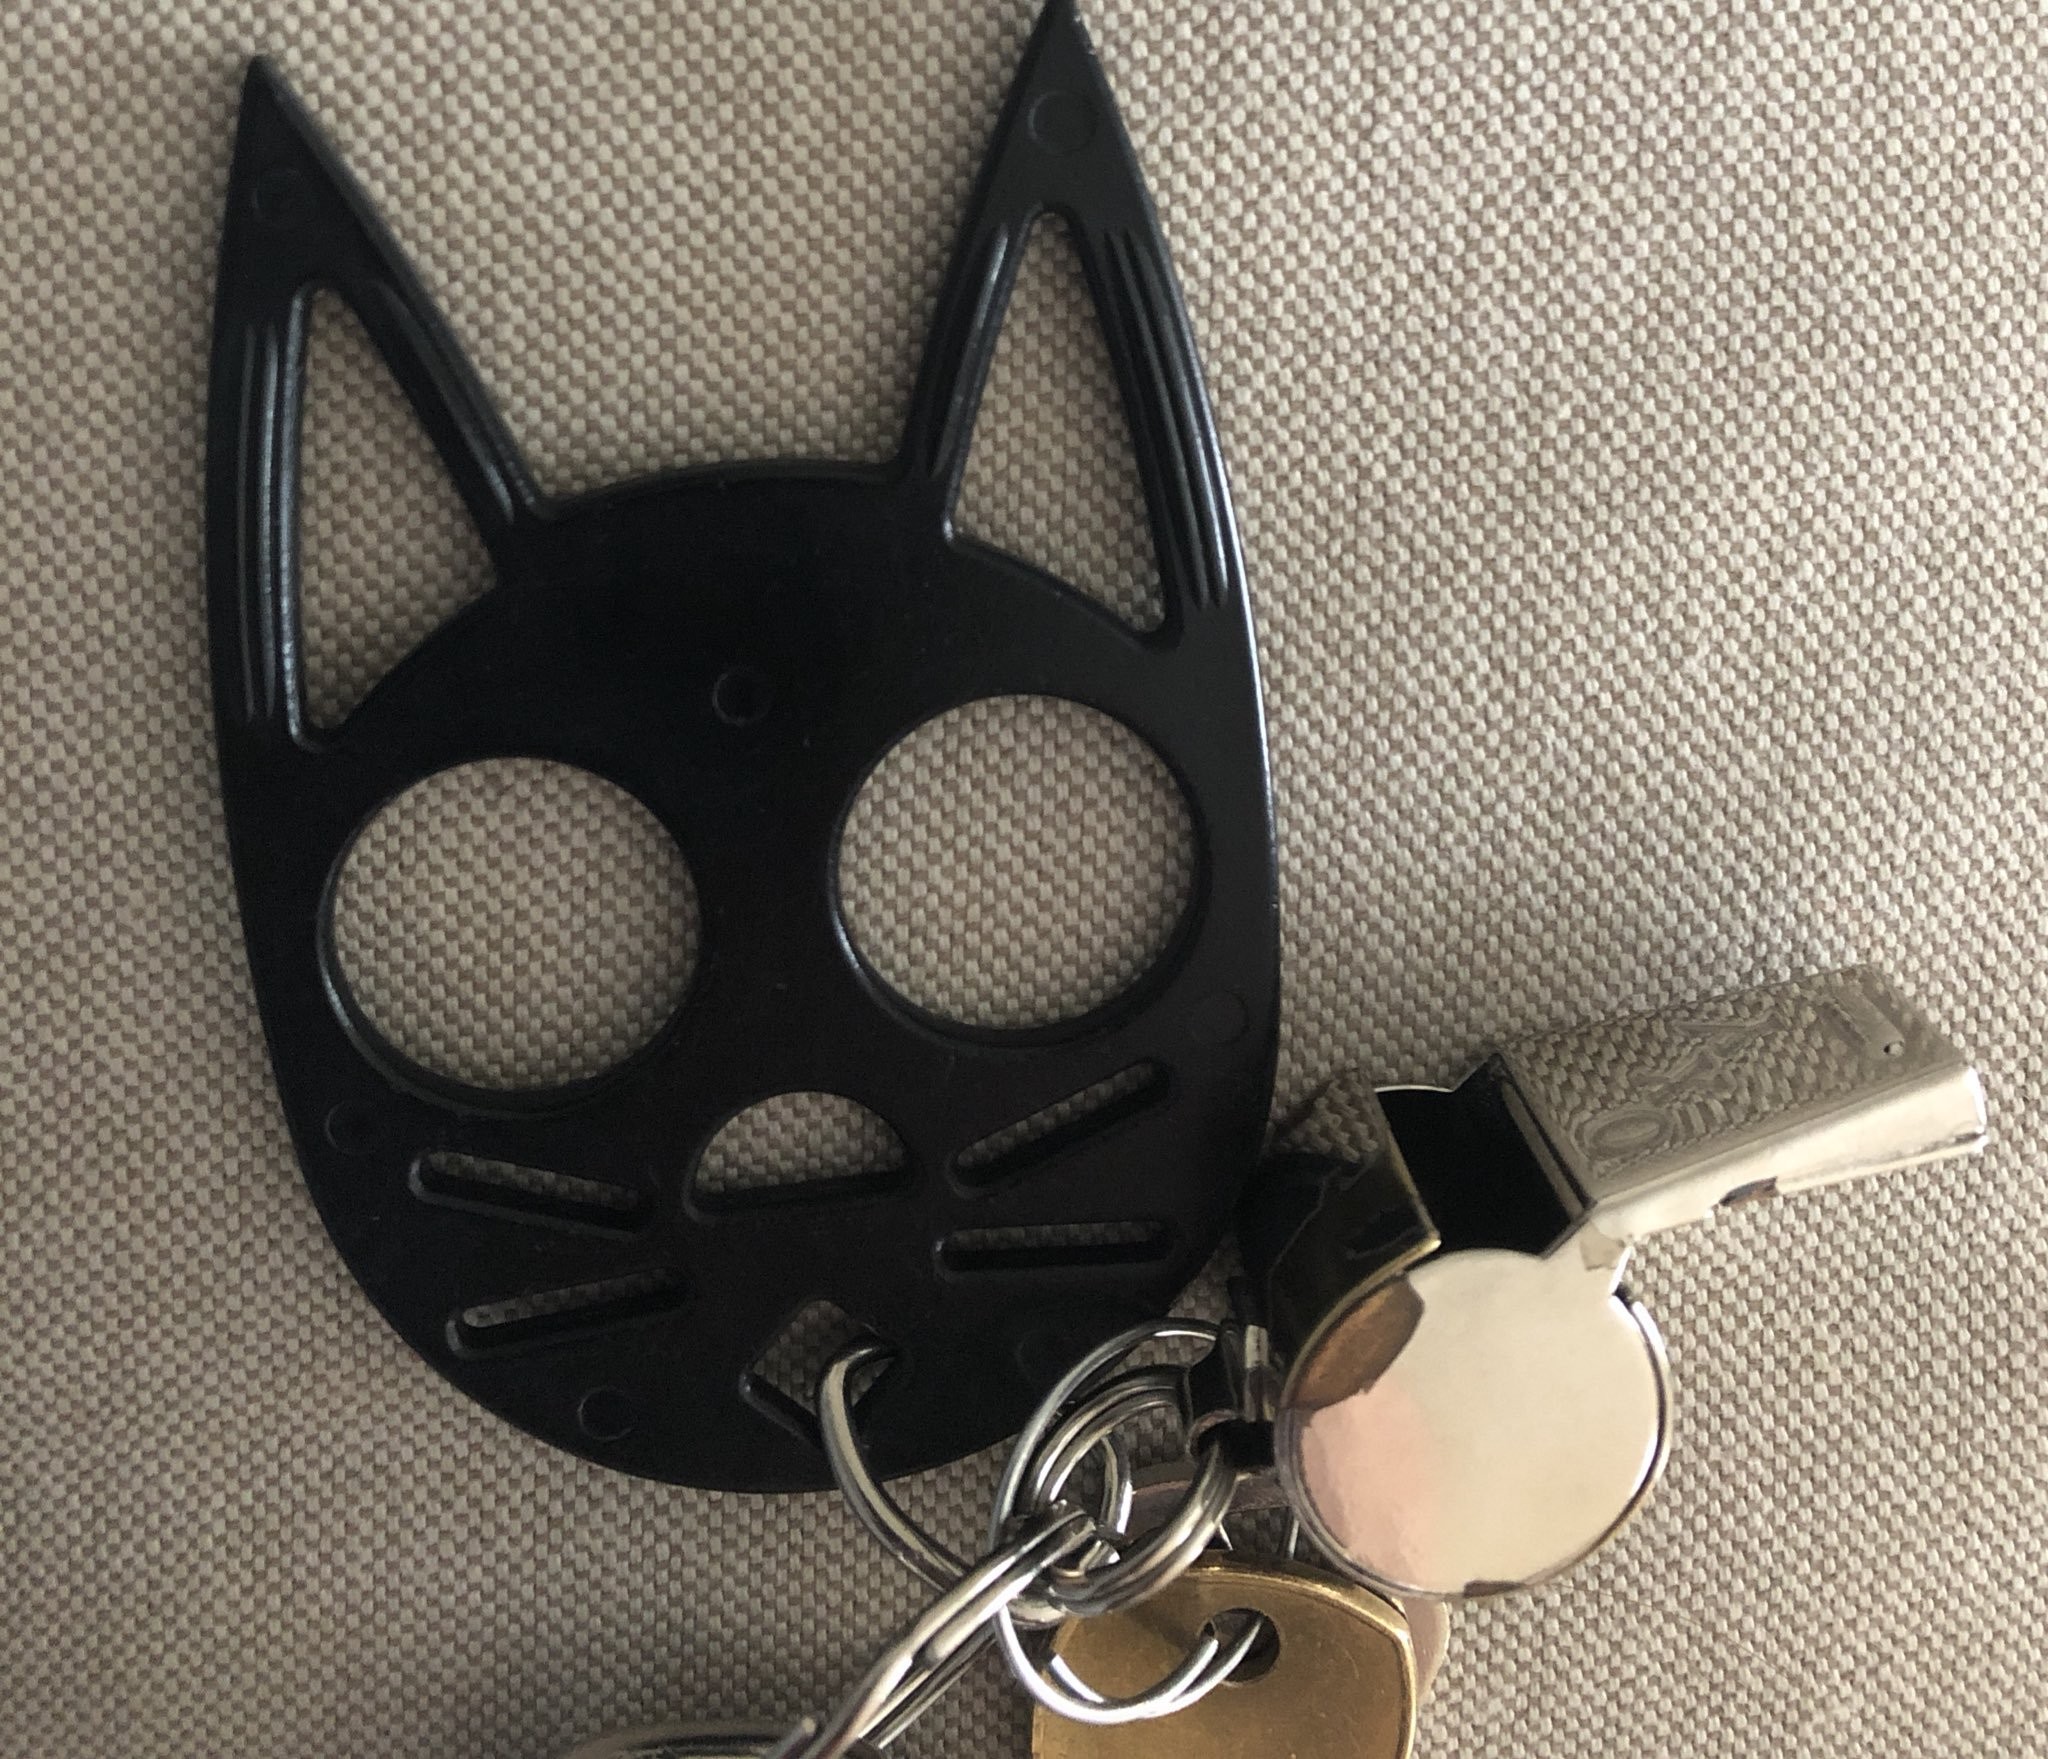 Texas to Lift Ban on Brass Knuckles and 'Kitty Keychains' on September 1, San Antonio